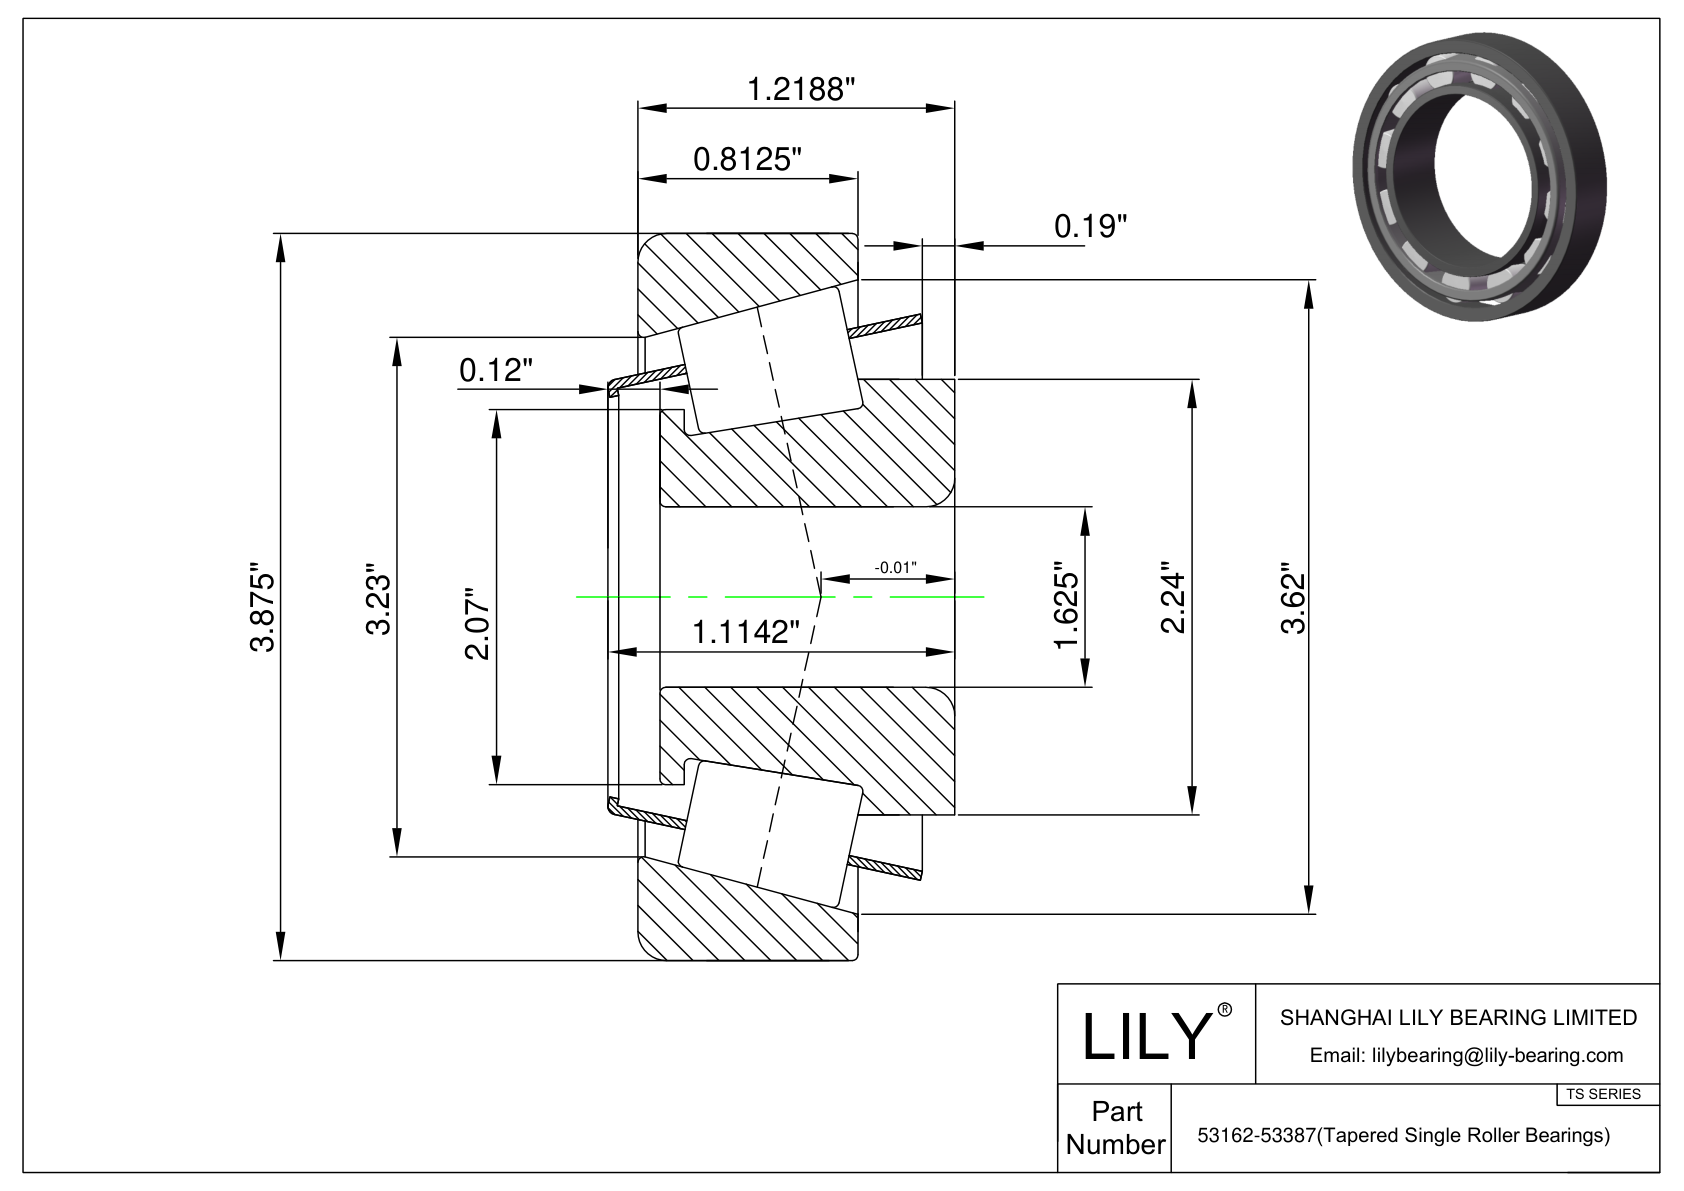 53162-53387 TS (Tapered Single Roller Bearings) (Imperial) cad drawing